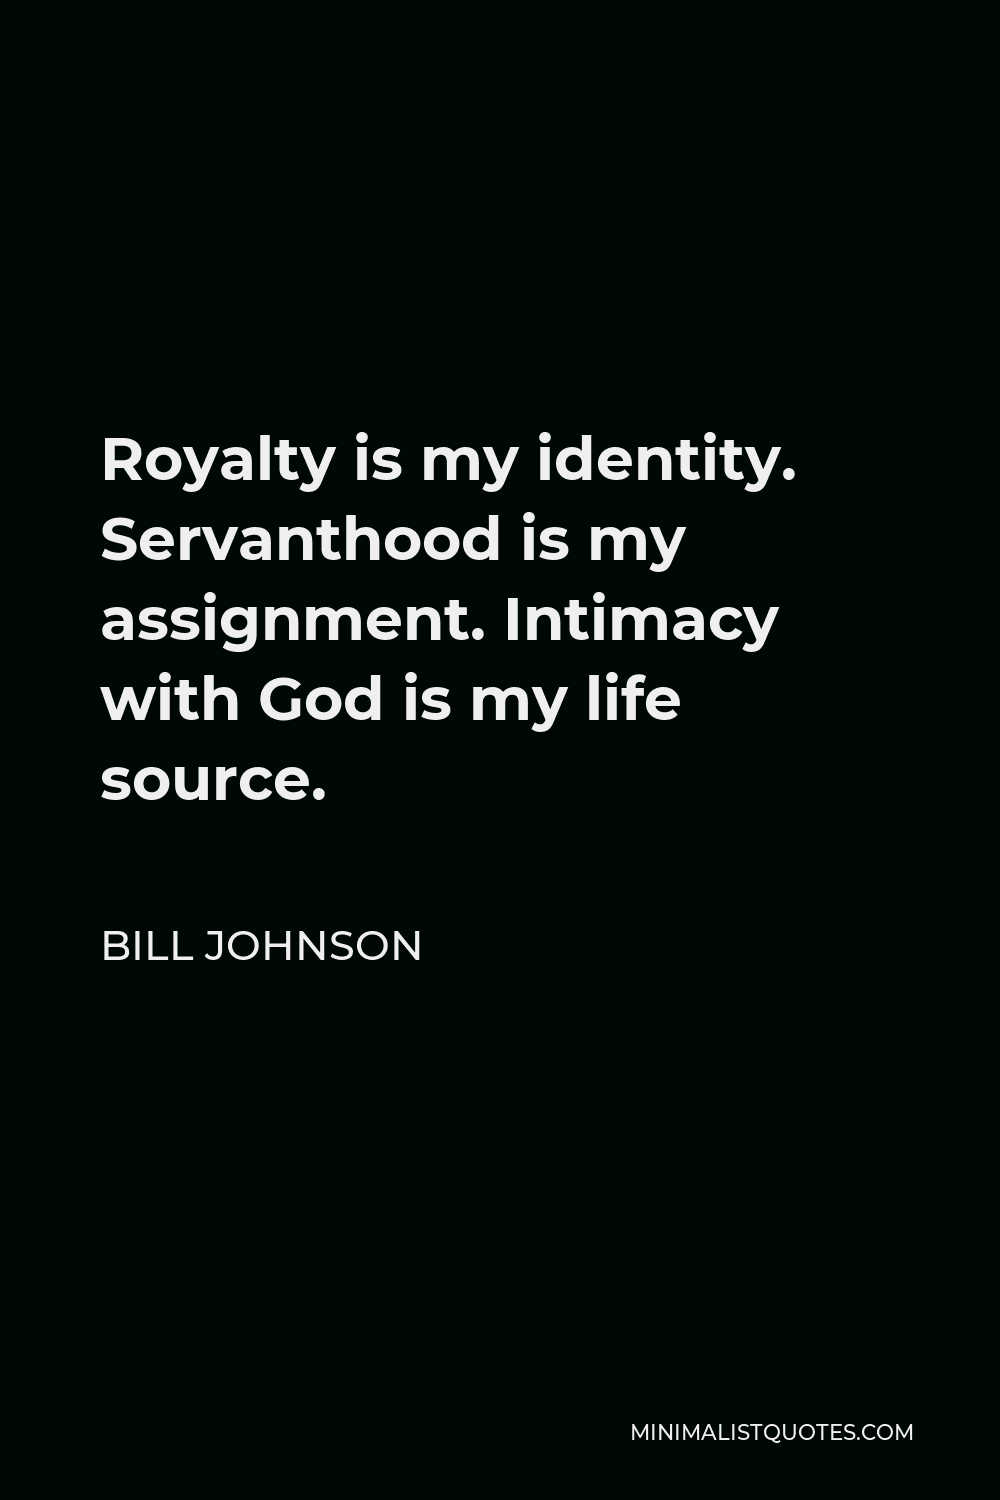 Bill Johnson Quote - Royalty is my identity. Servanthood is my assignment. Intimacy with God is my life source.